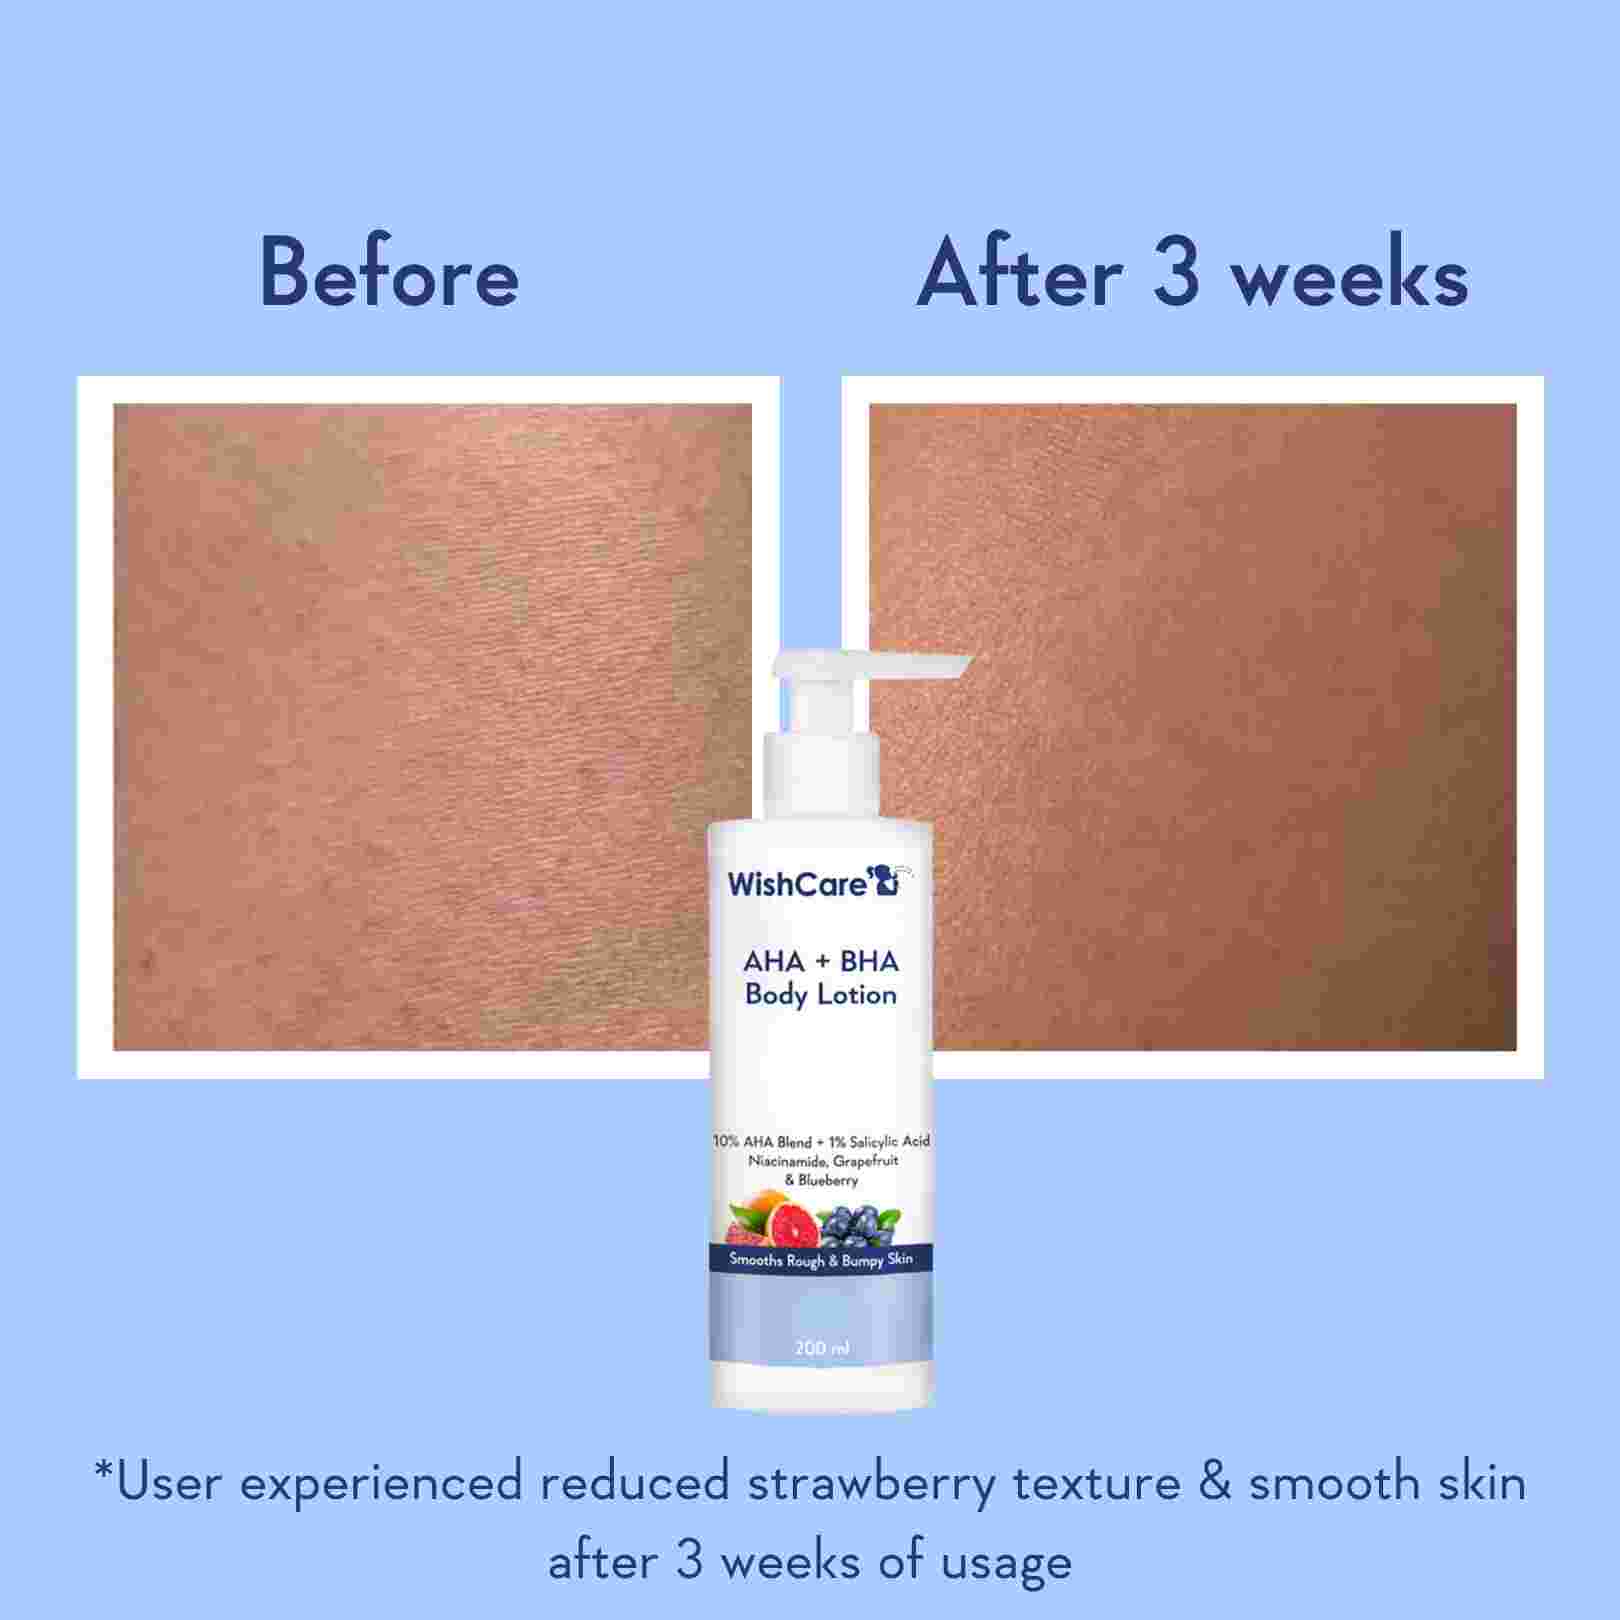 picture about how aha bha body lotion works on strawberry legs and body acne